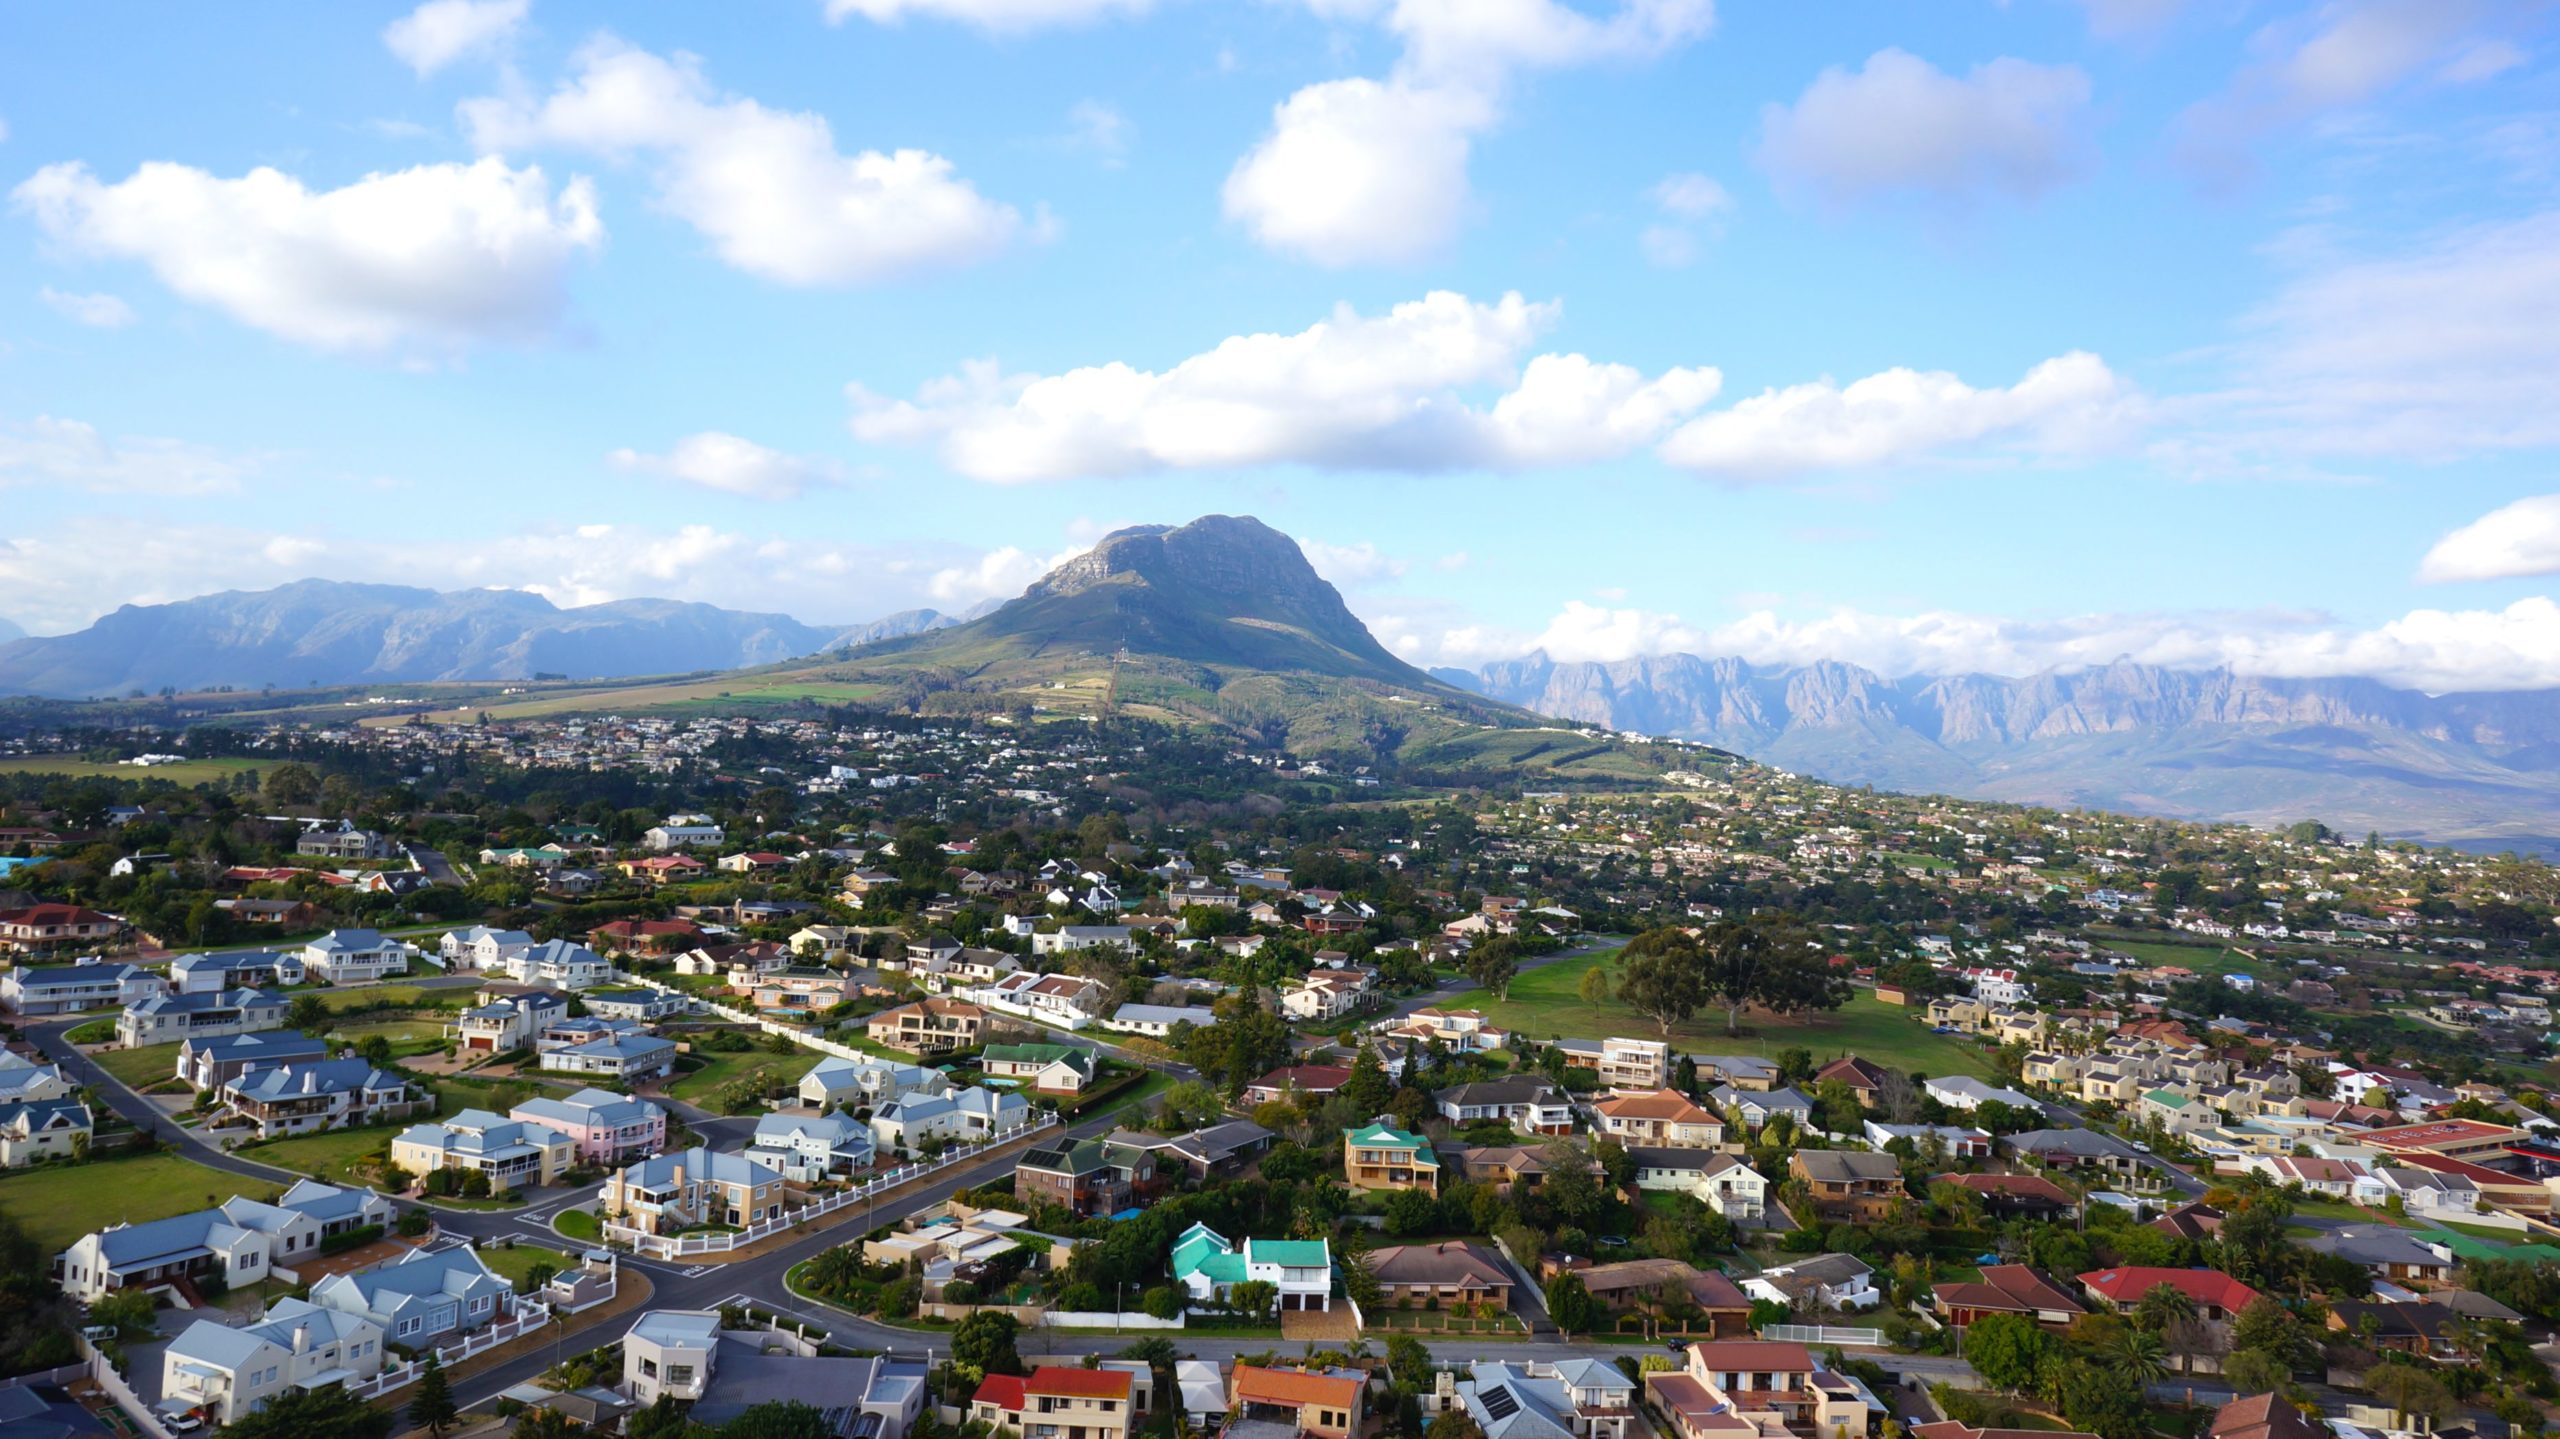 Somerset West, Western Cape, South Africa